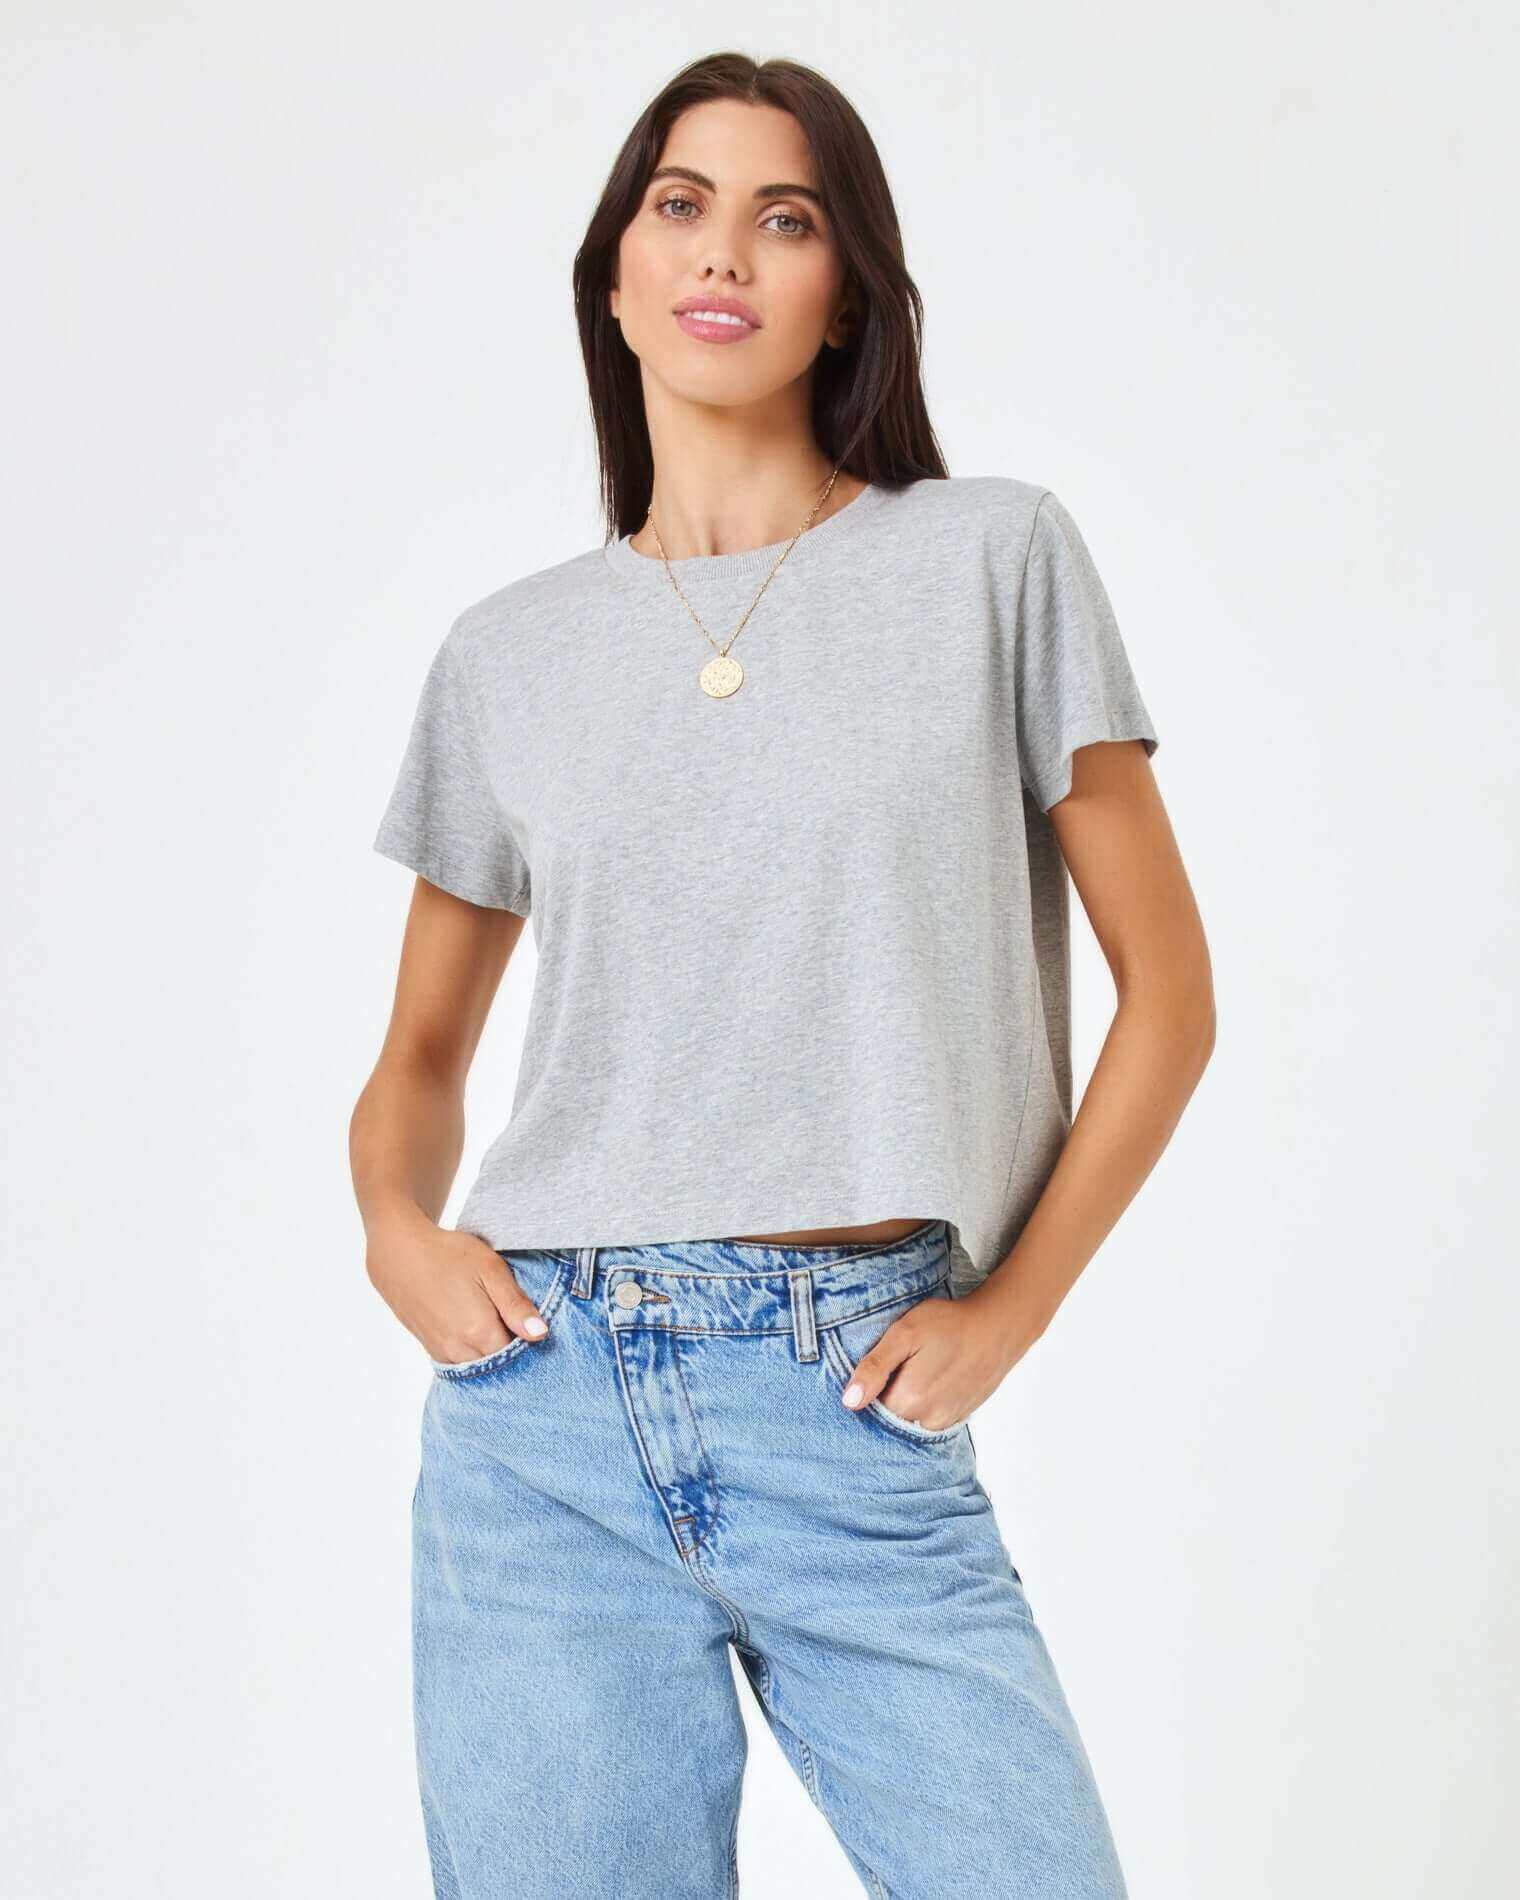 LSpace All Day Top in Heather Grey - Front